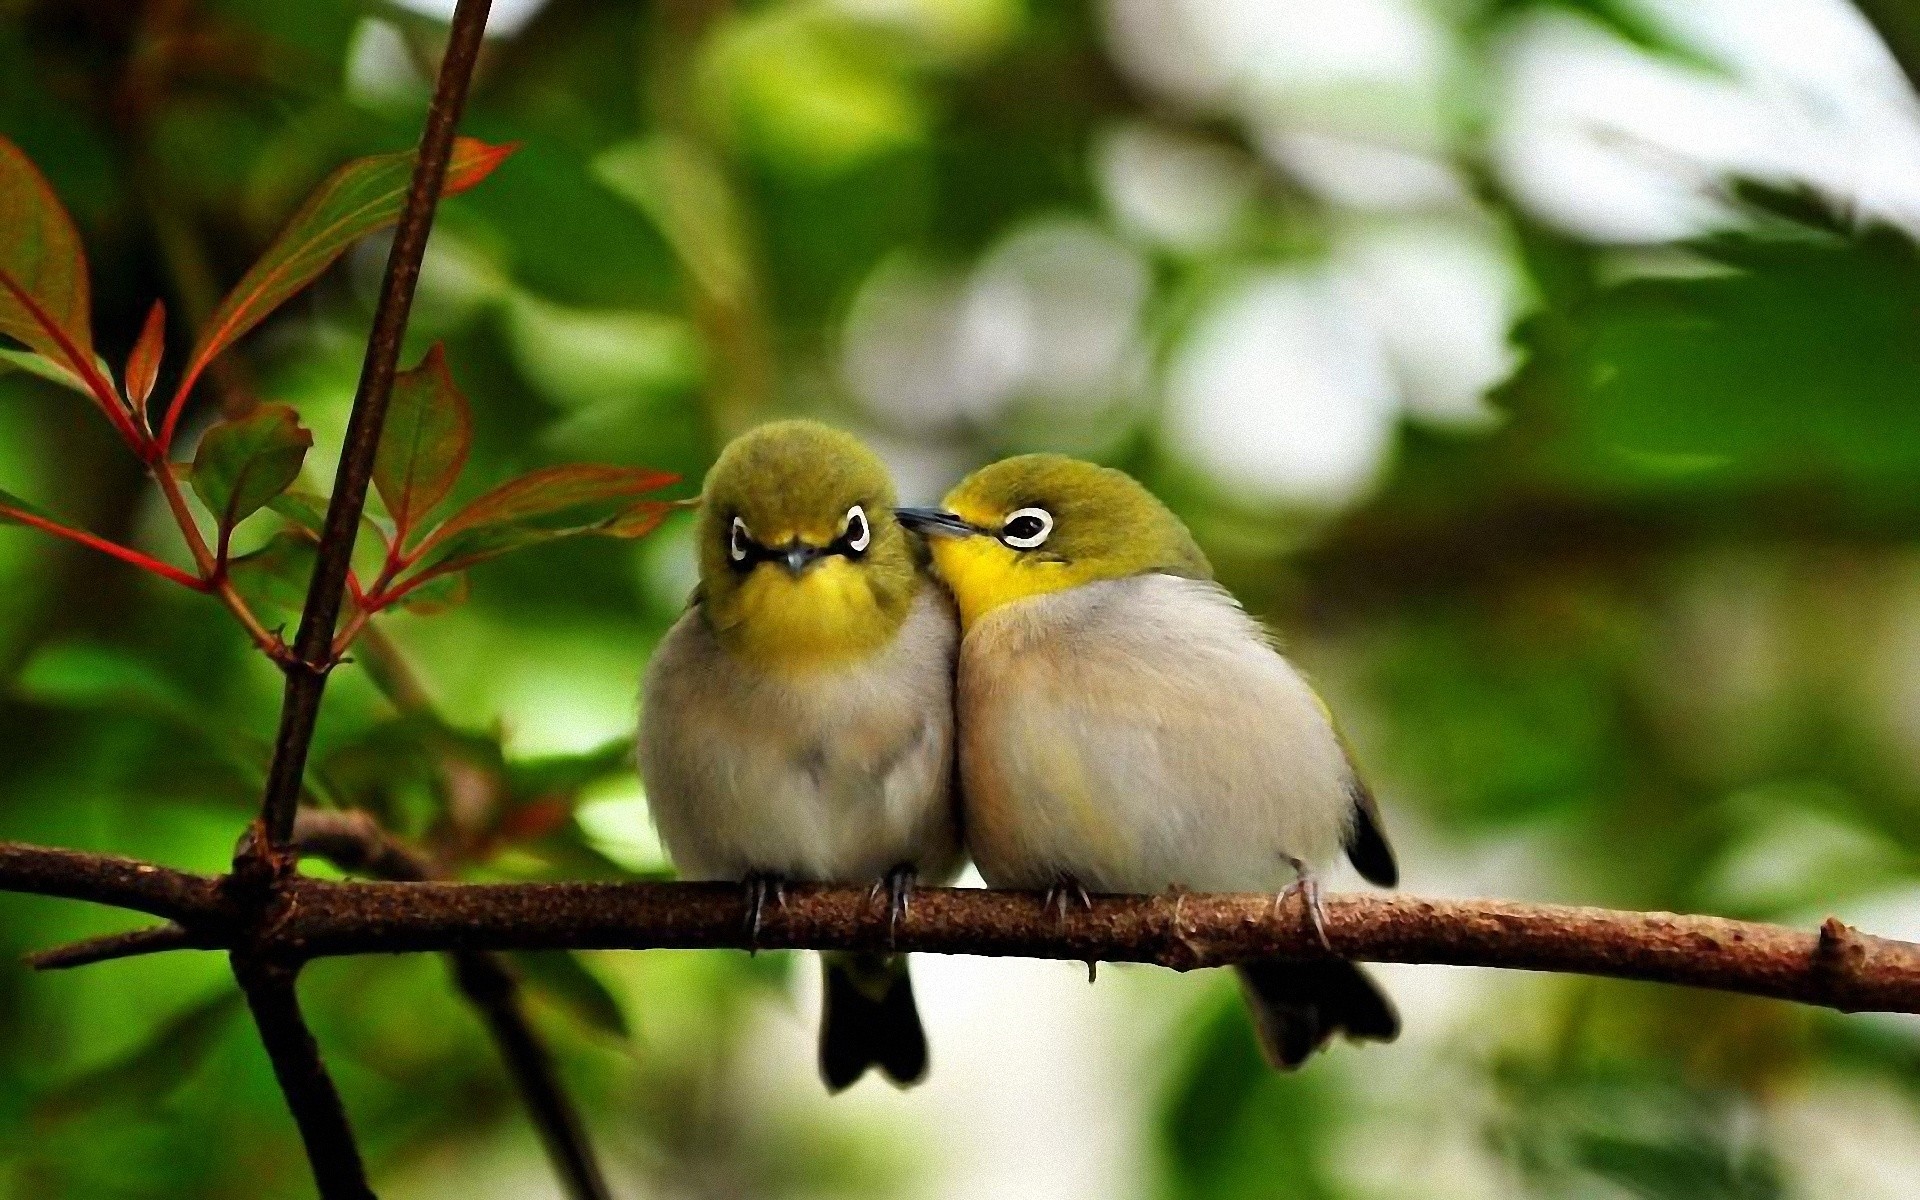 Adorable Pictures of Birds